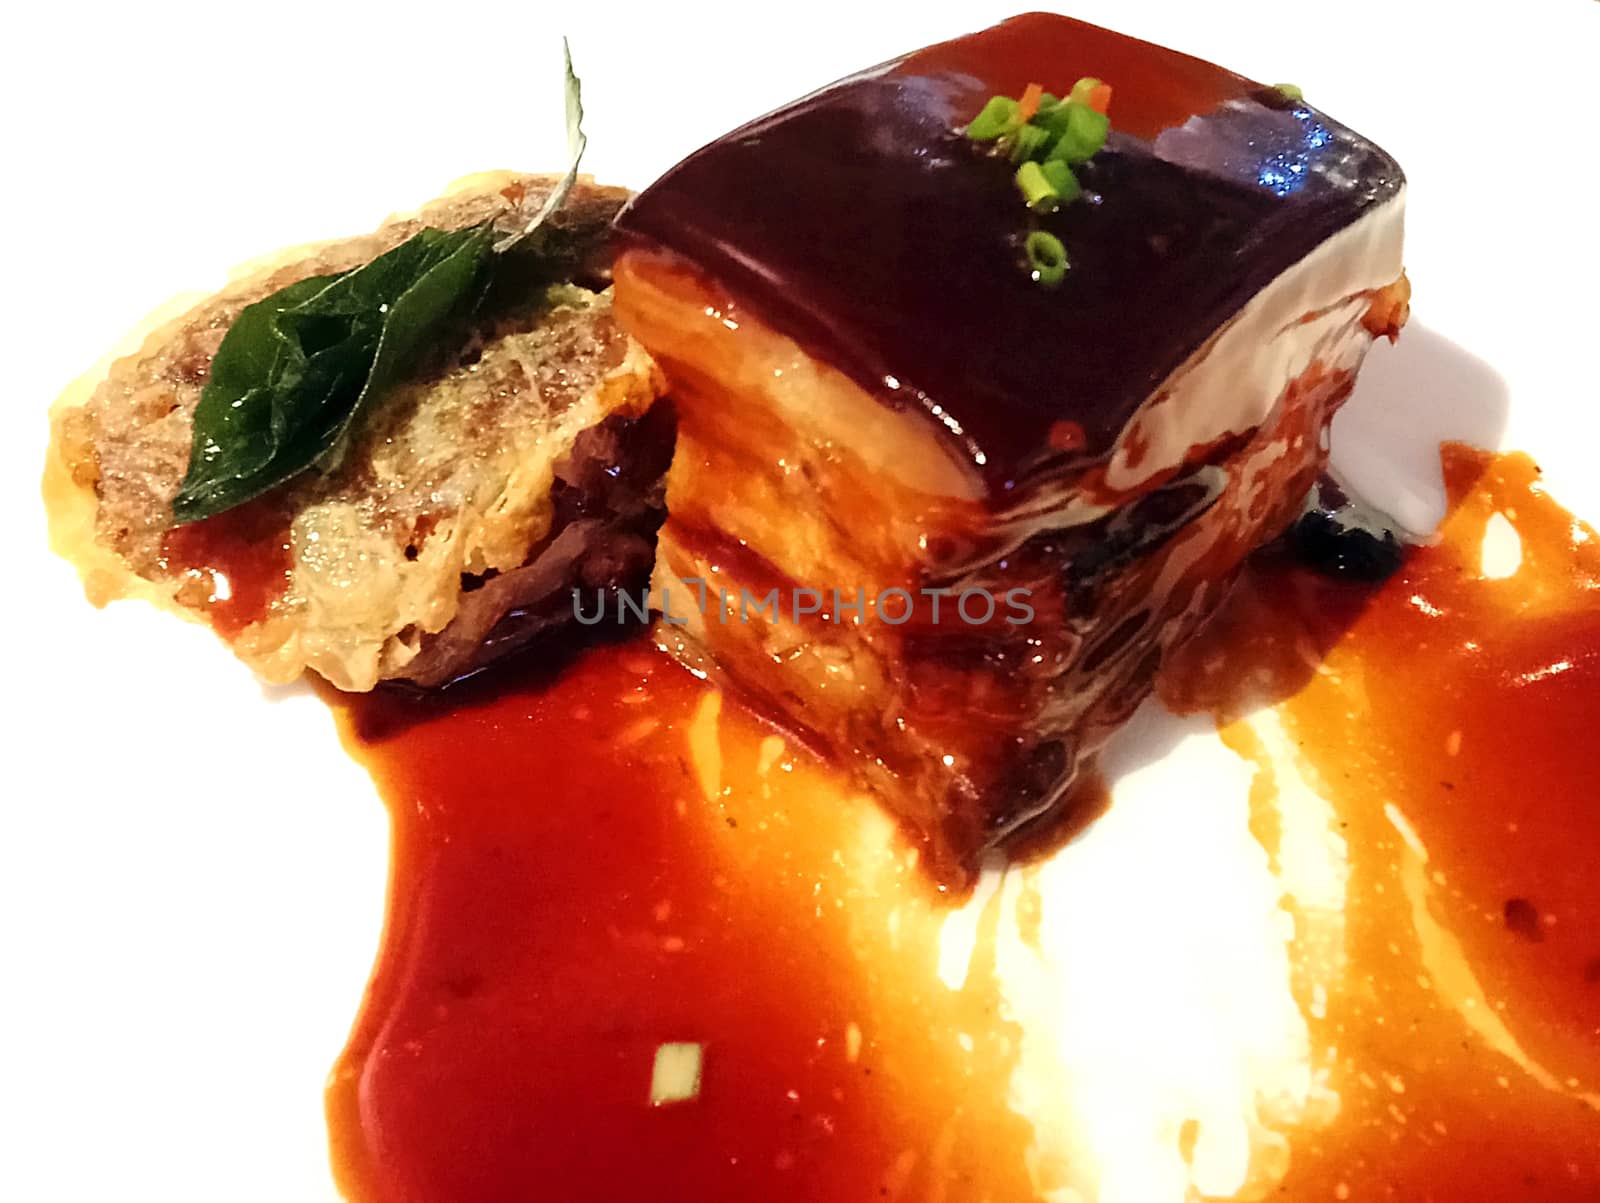 Juicy pork belly on white plate by imwaltersy